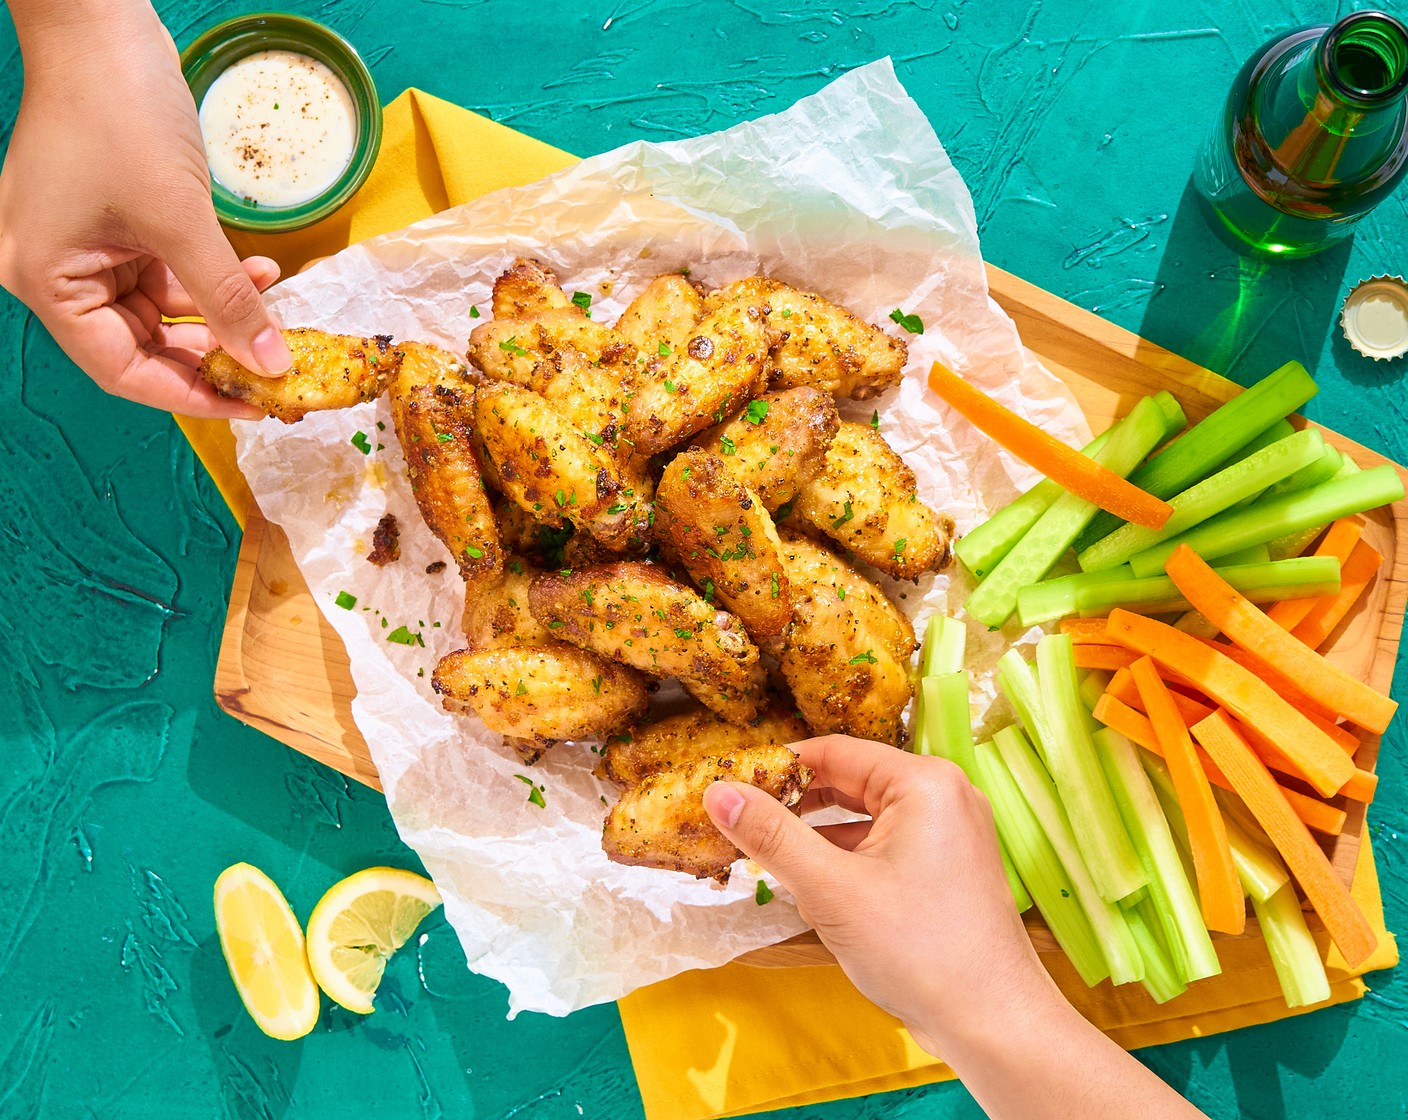 step 9 Garnish the wings with Fresh Parsley (1 Tbsp) and serve along with the Margaritas. Enjoy!